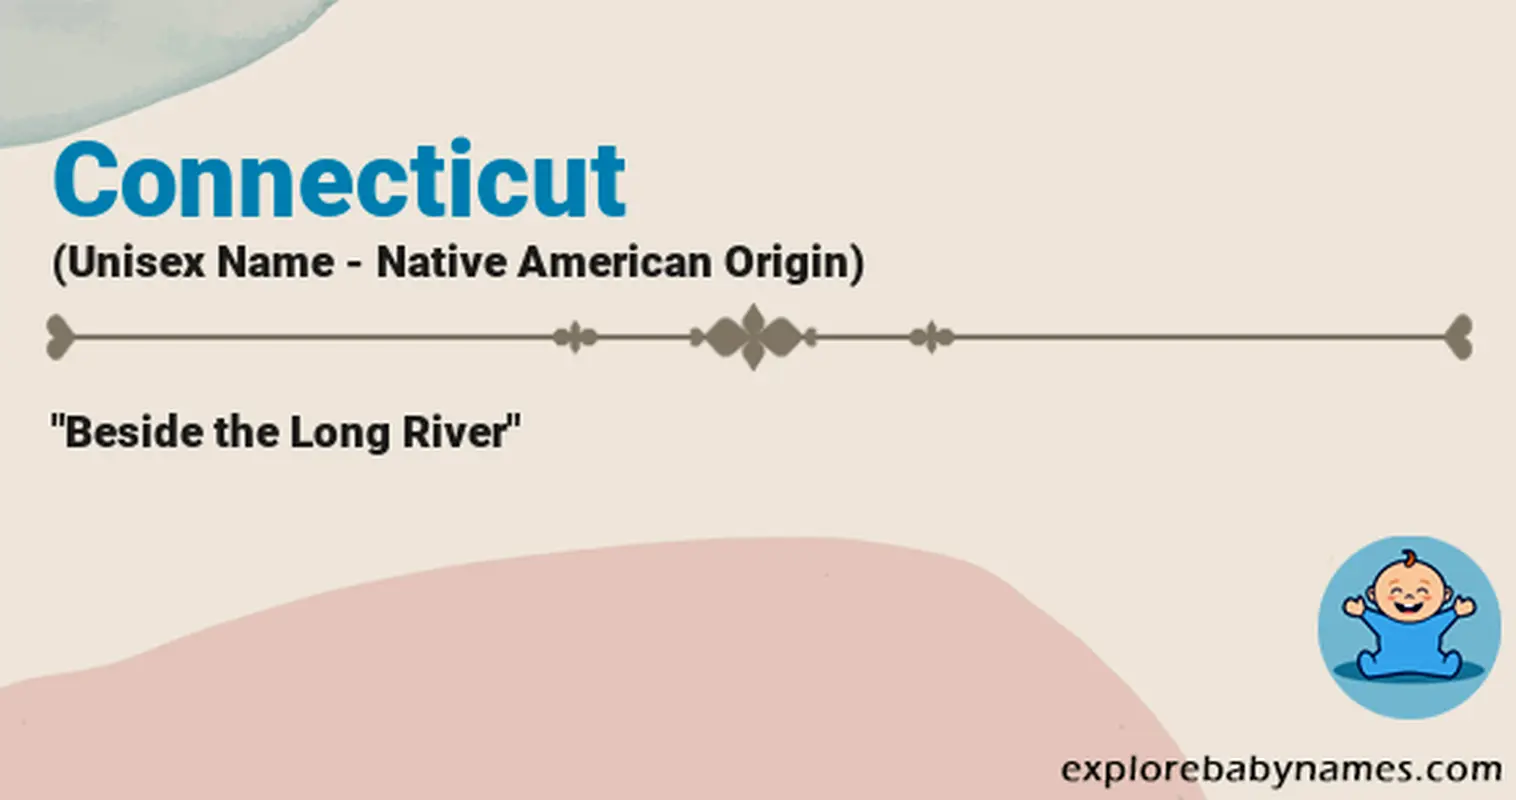 Meaning of Connecticut